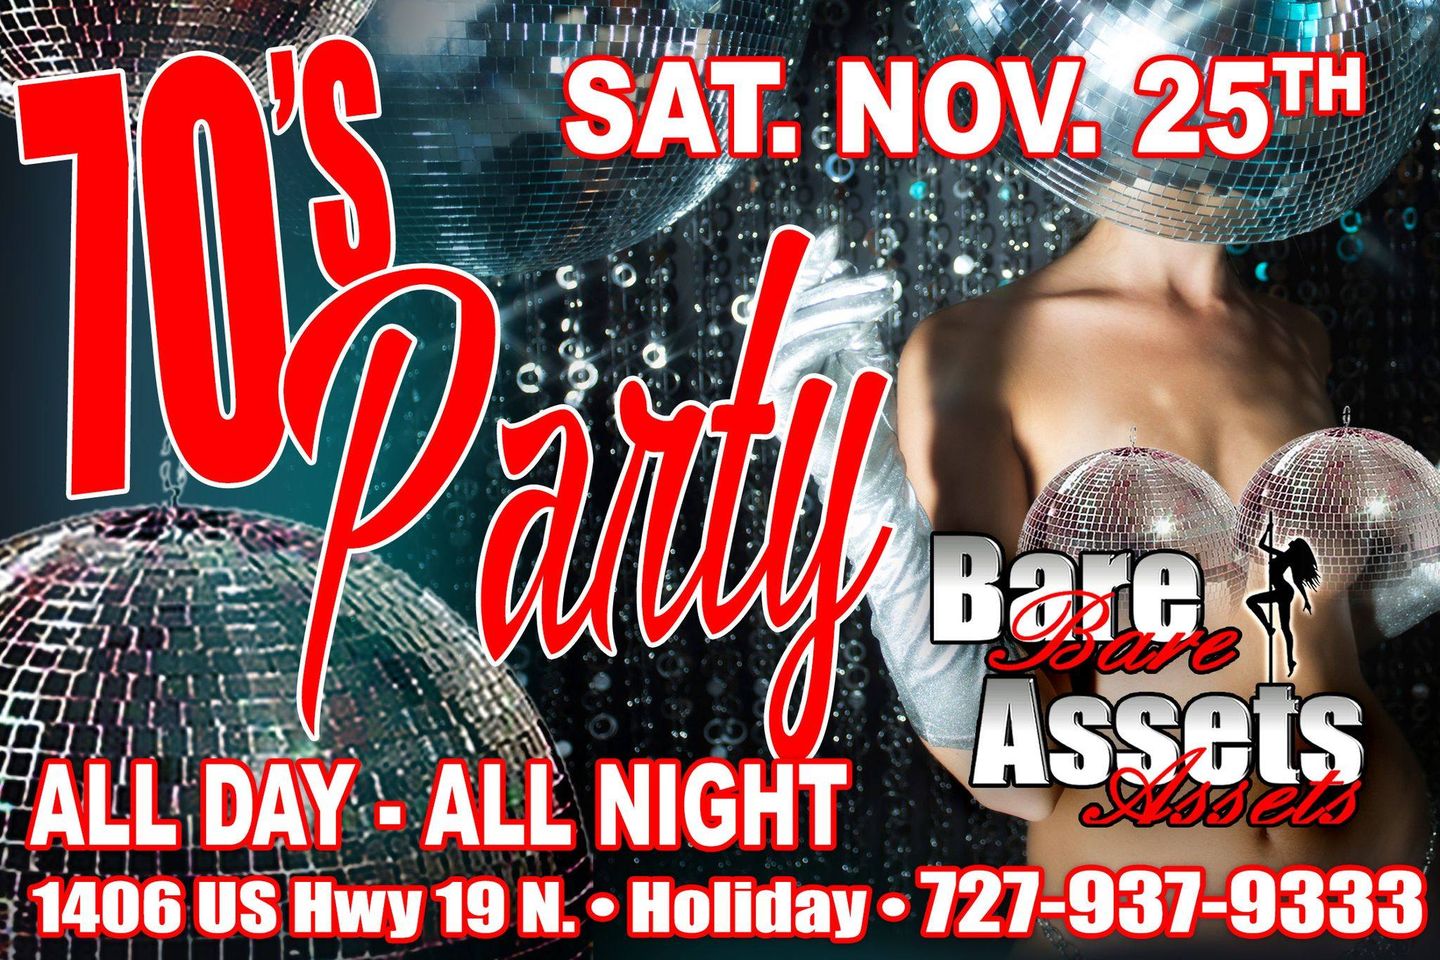 A 70’s Party at Bare Assets!